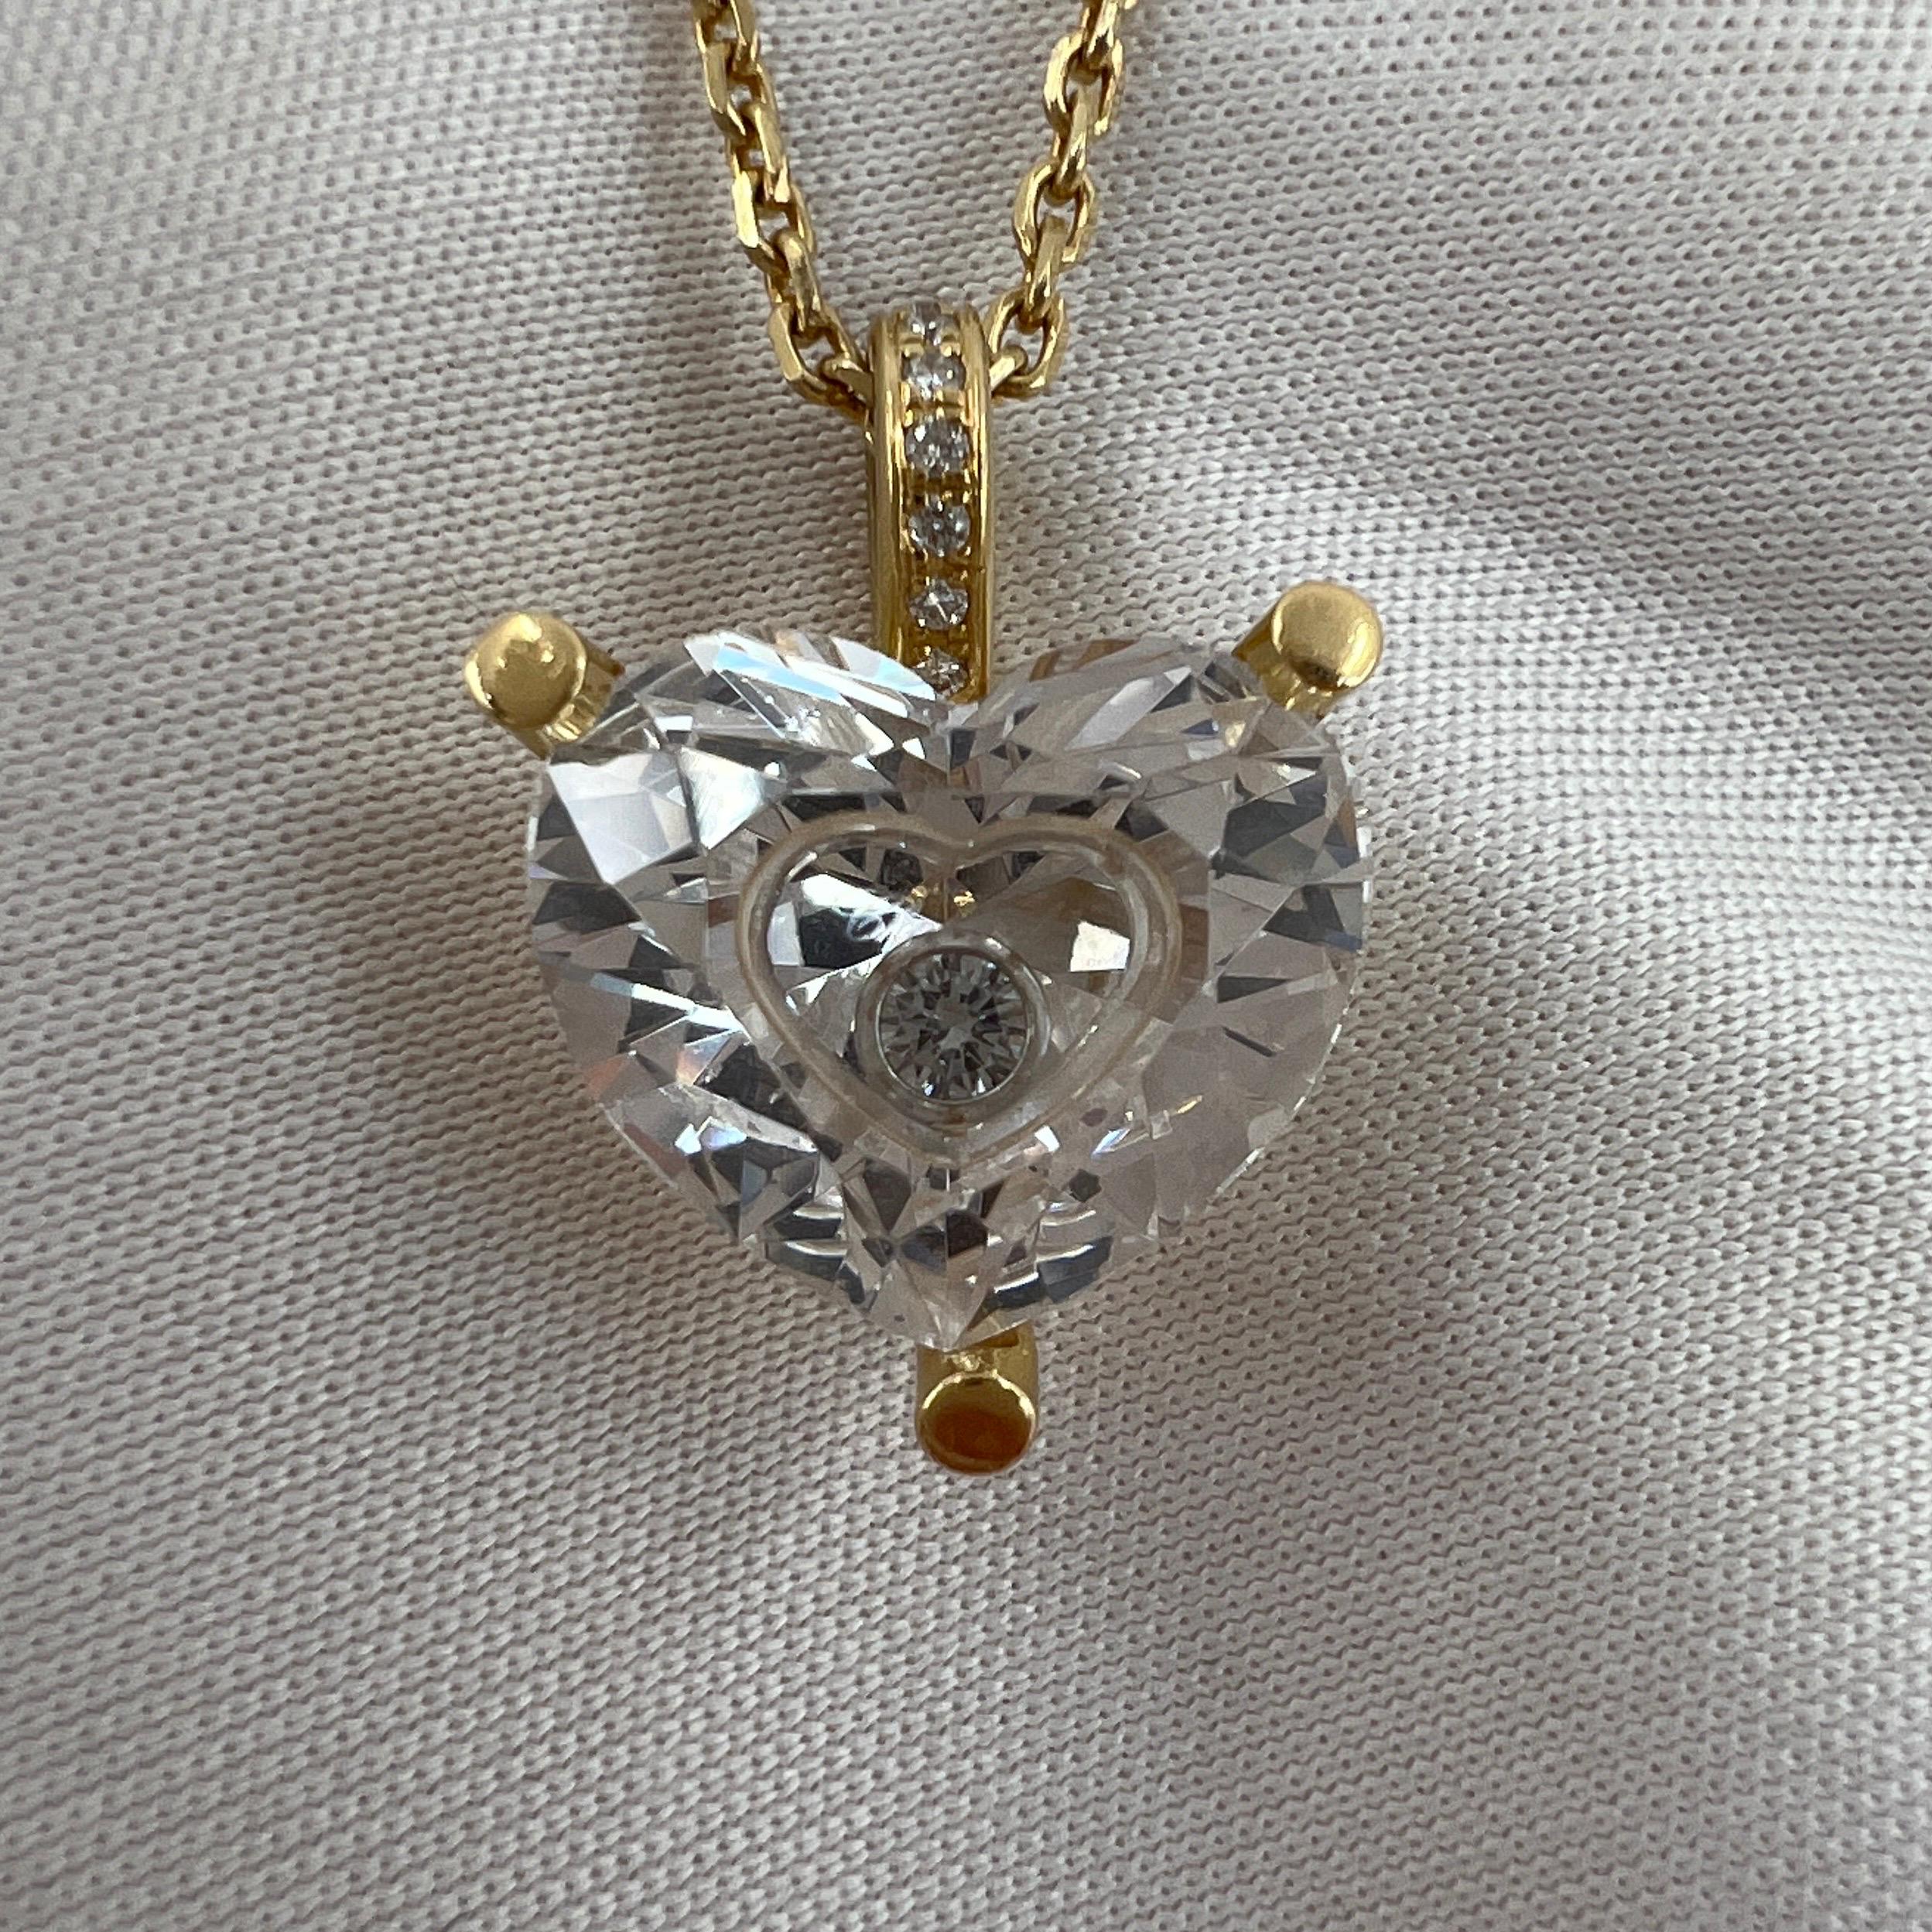 Vintage Chopard So Happy Diamonds Heart 18k Yellow Gold Pendant Necklace In Excellent Condition For Sale In Birmingham, GB